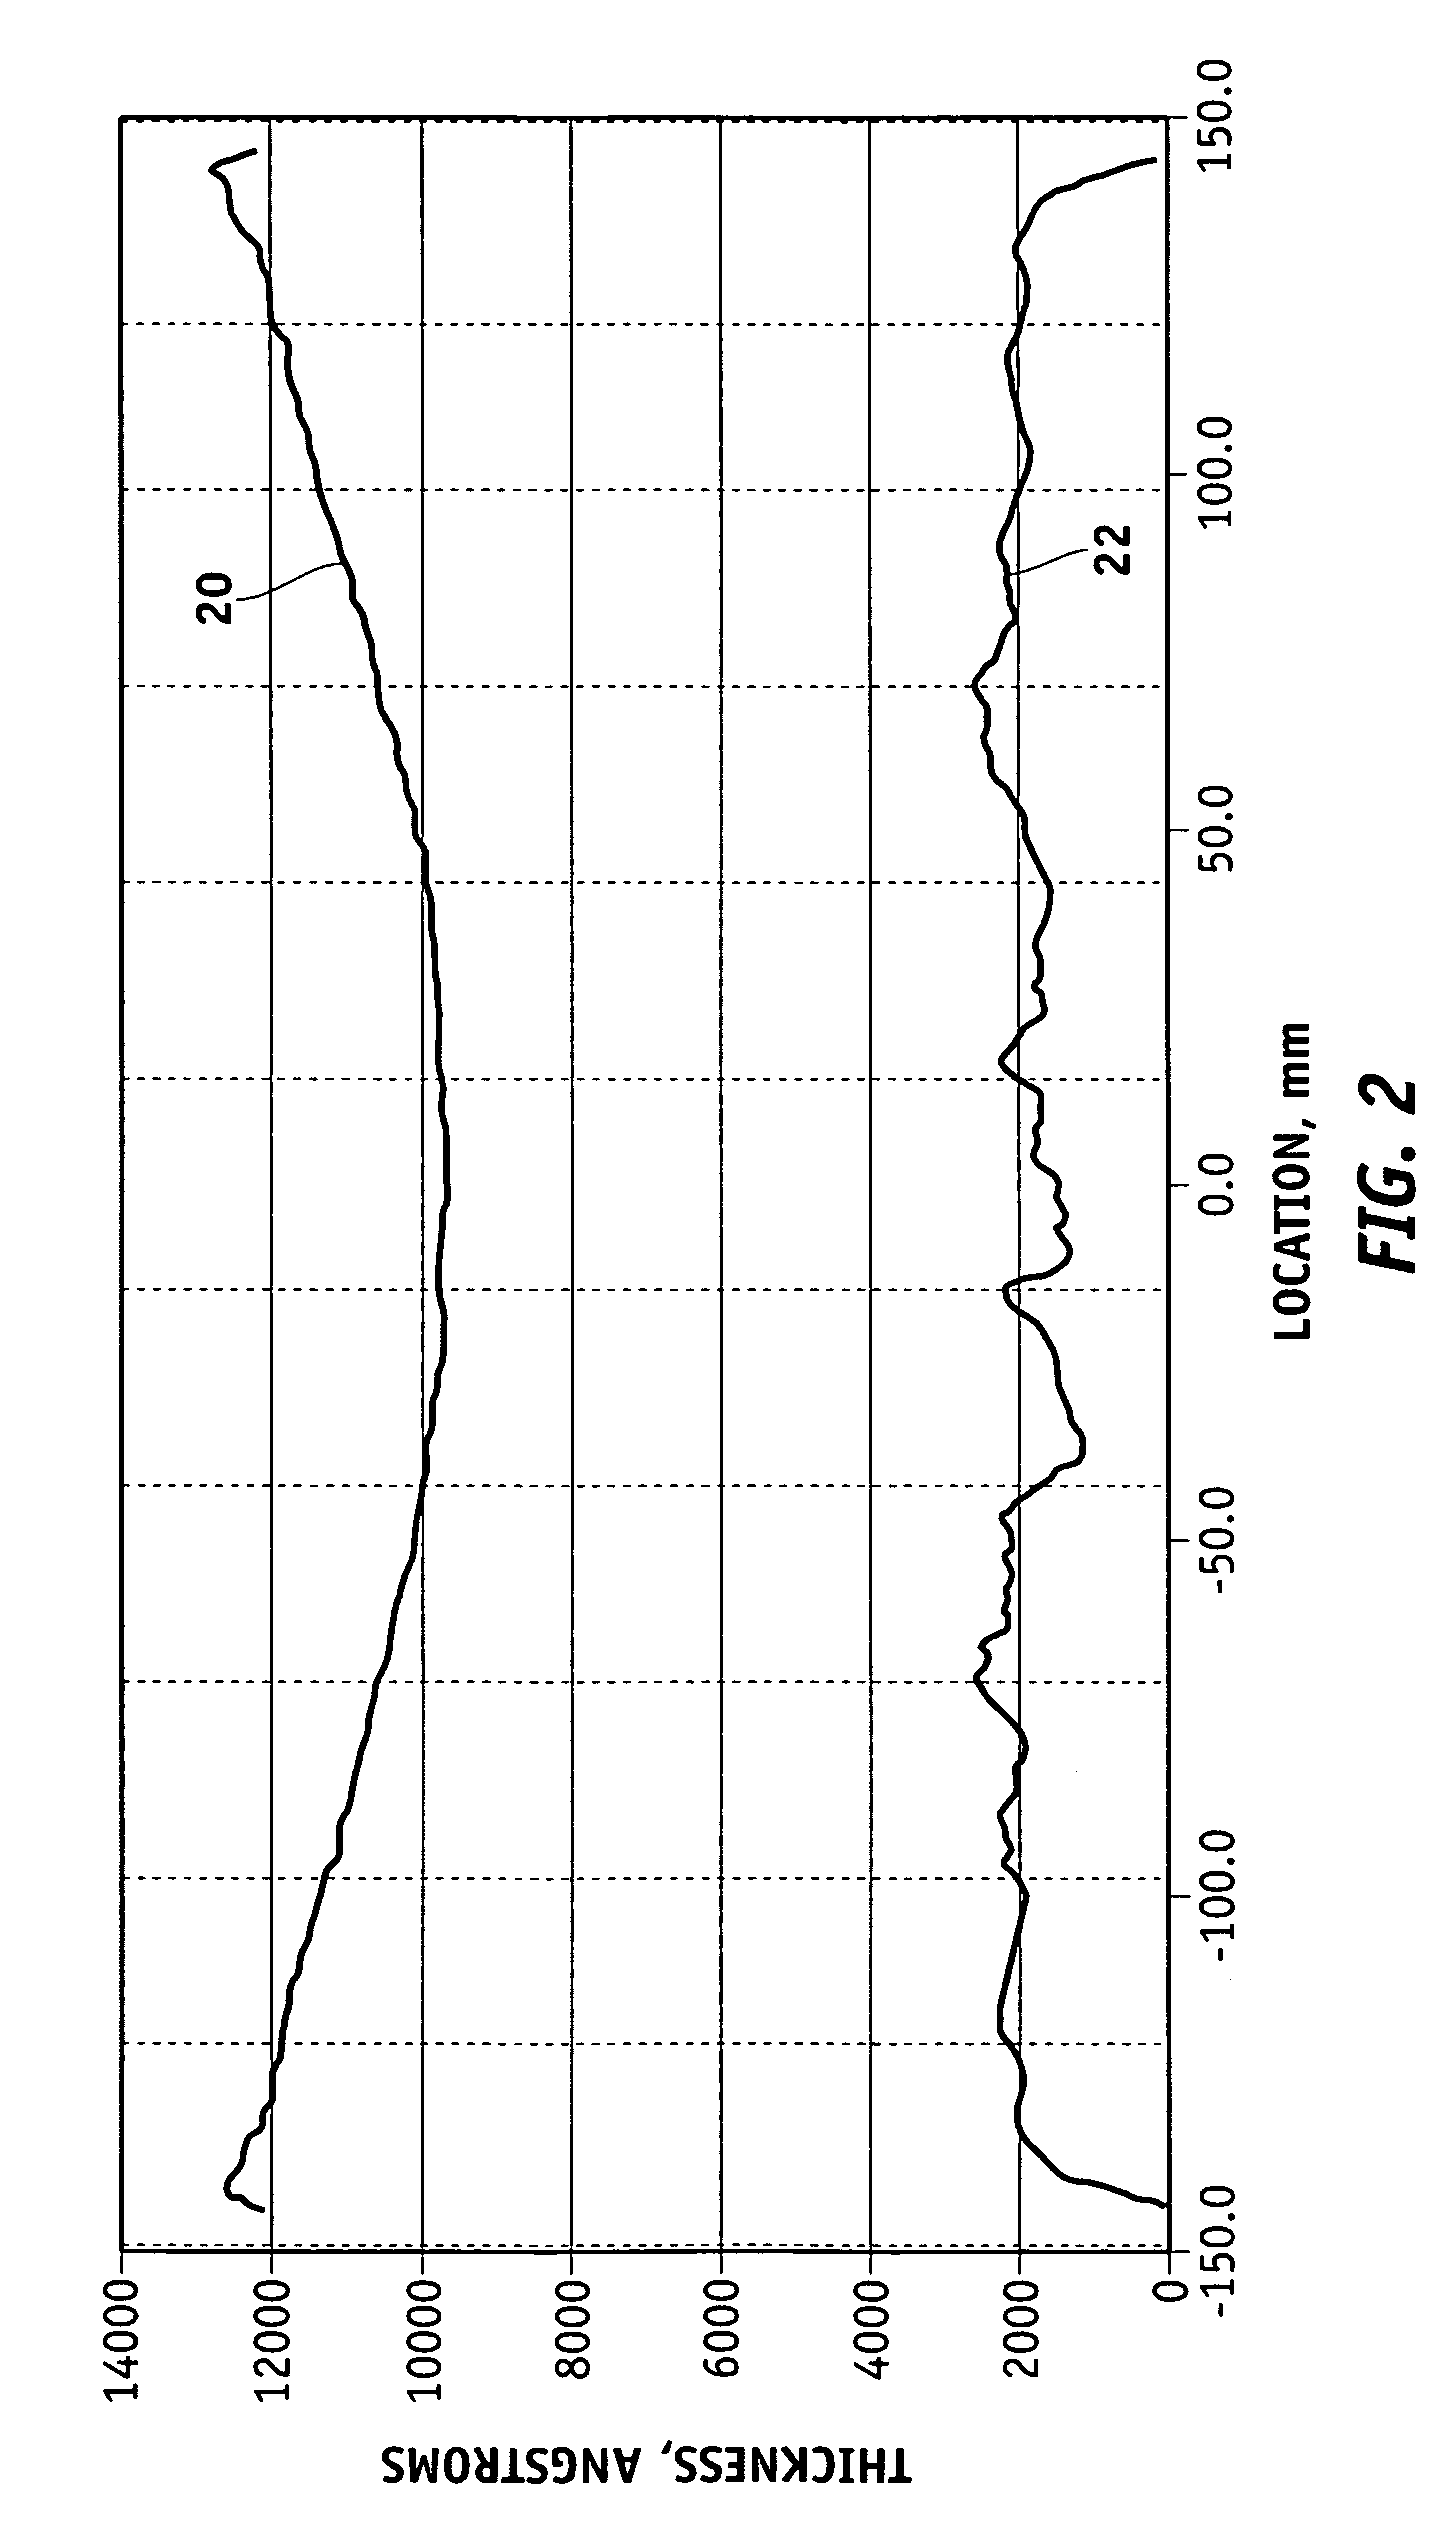 Methods for controlling the pressures of adjustable pressure zones of a work piece carrier during chemical mechanical planarization